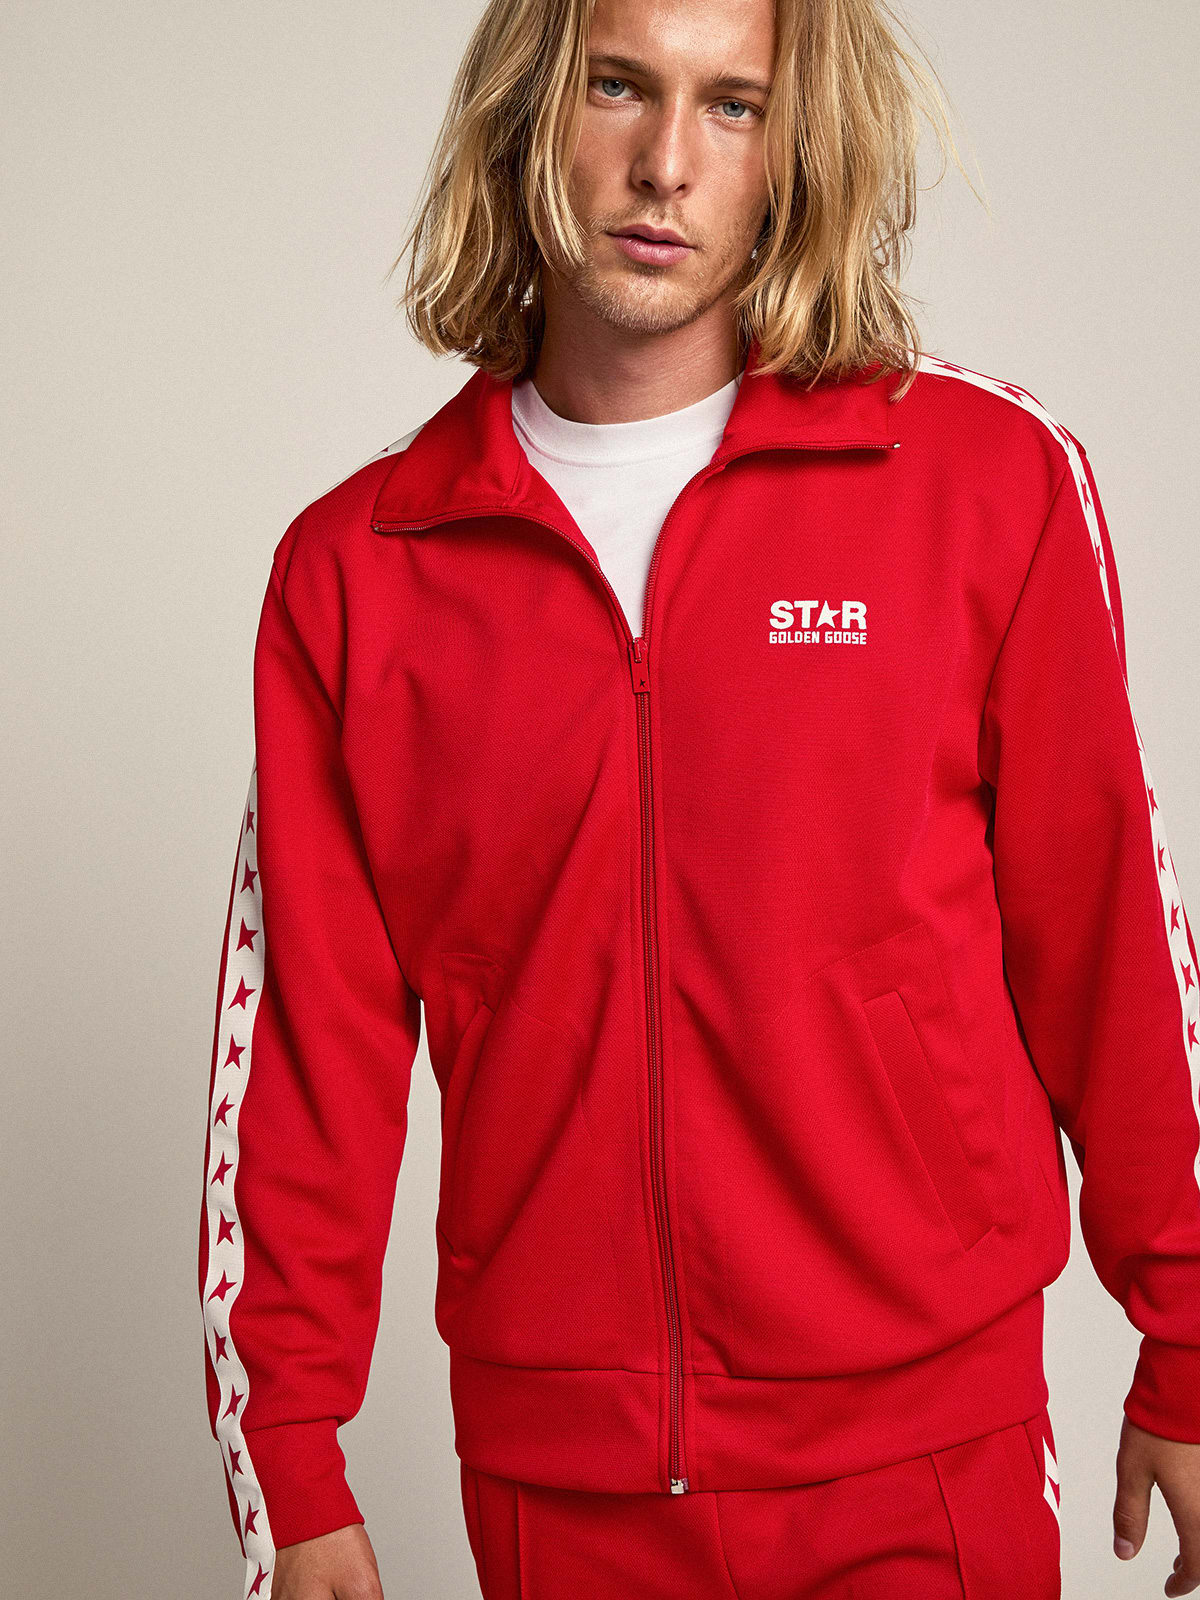 Golden Goose - Red Denis Star Collection zipped sweatshirt with red stars in 